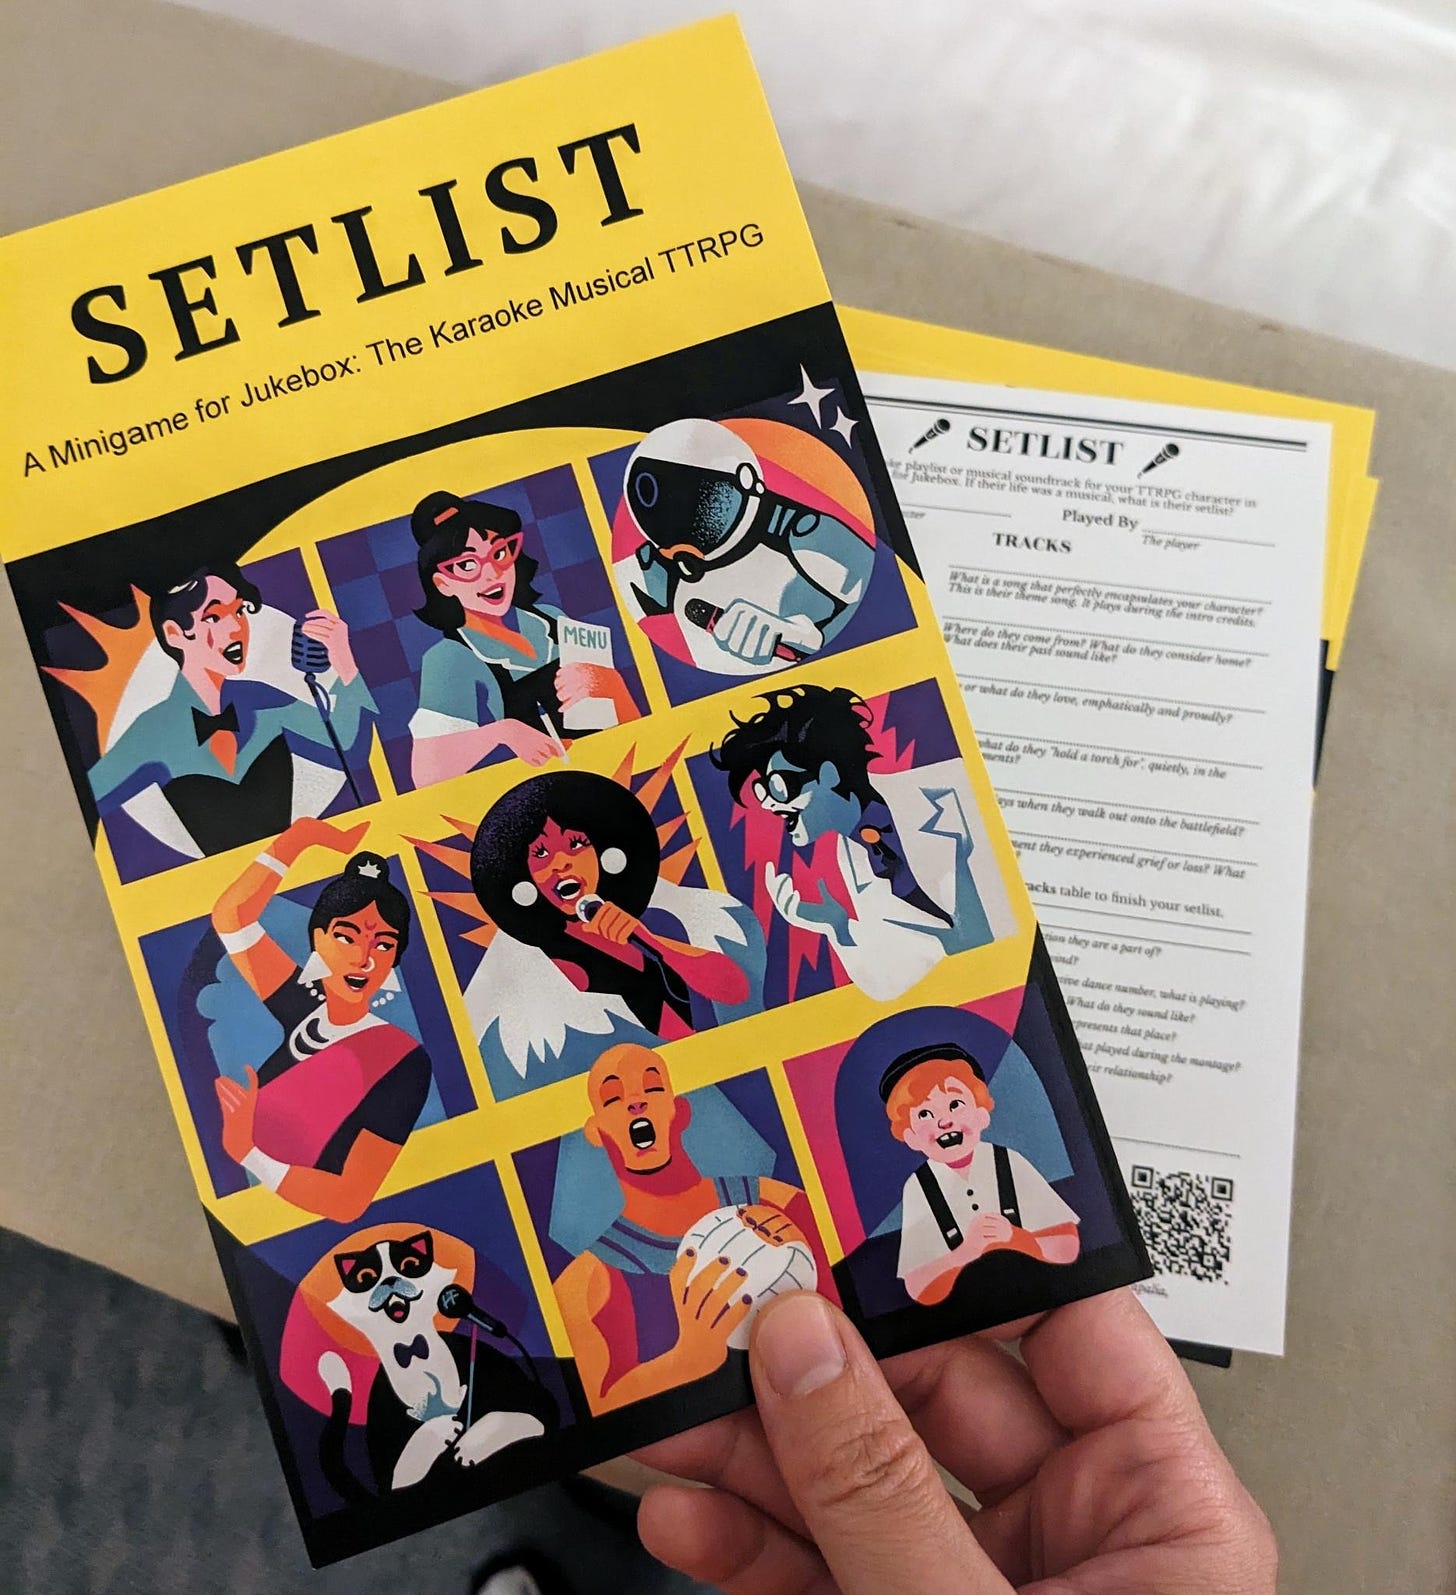 Photo of the Setlist minigame flyer.